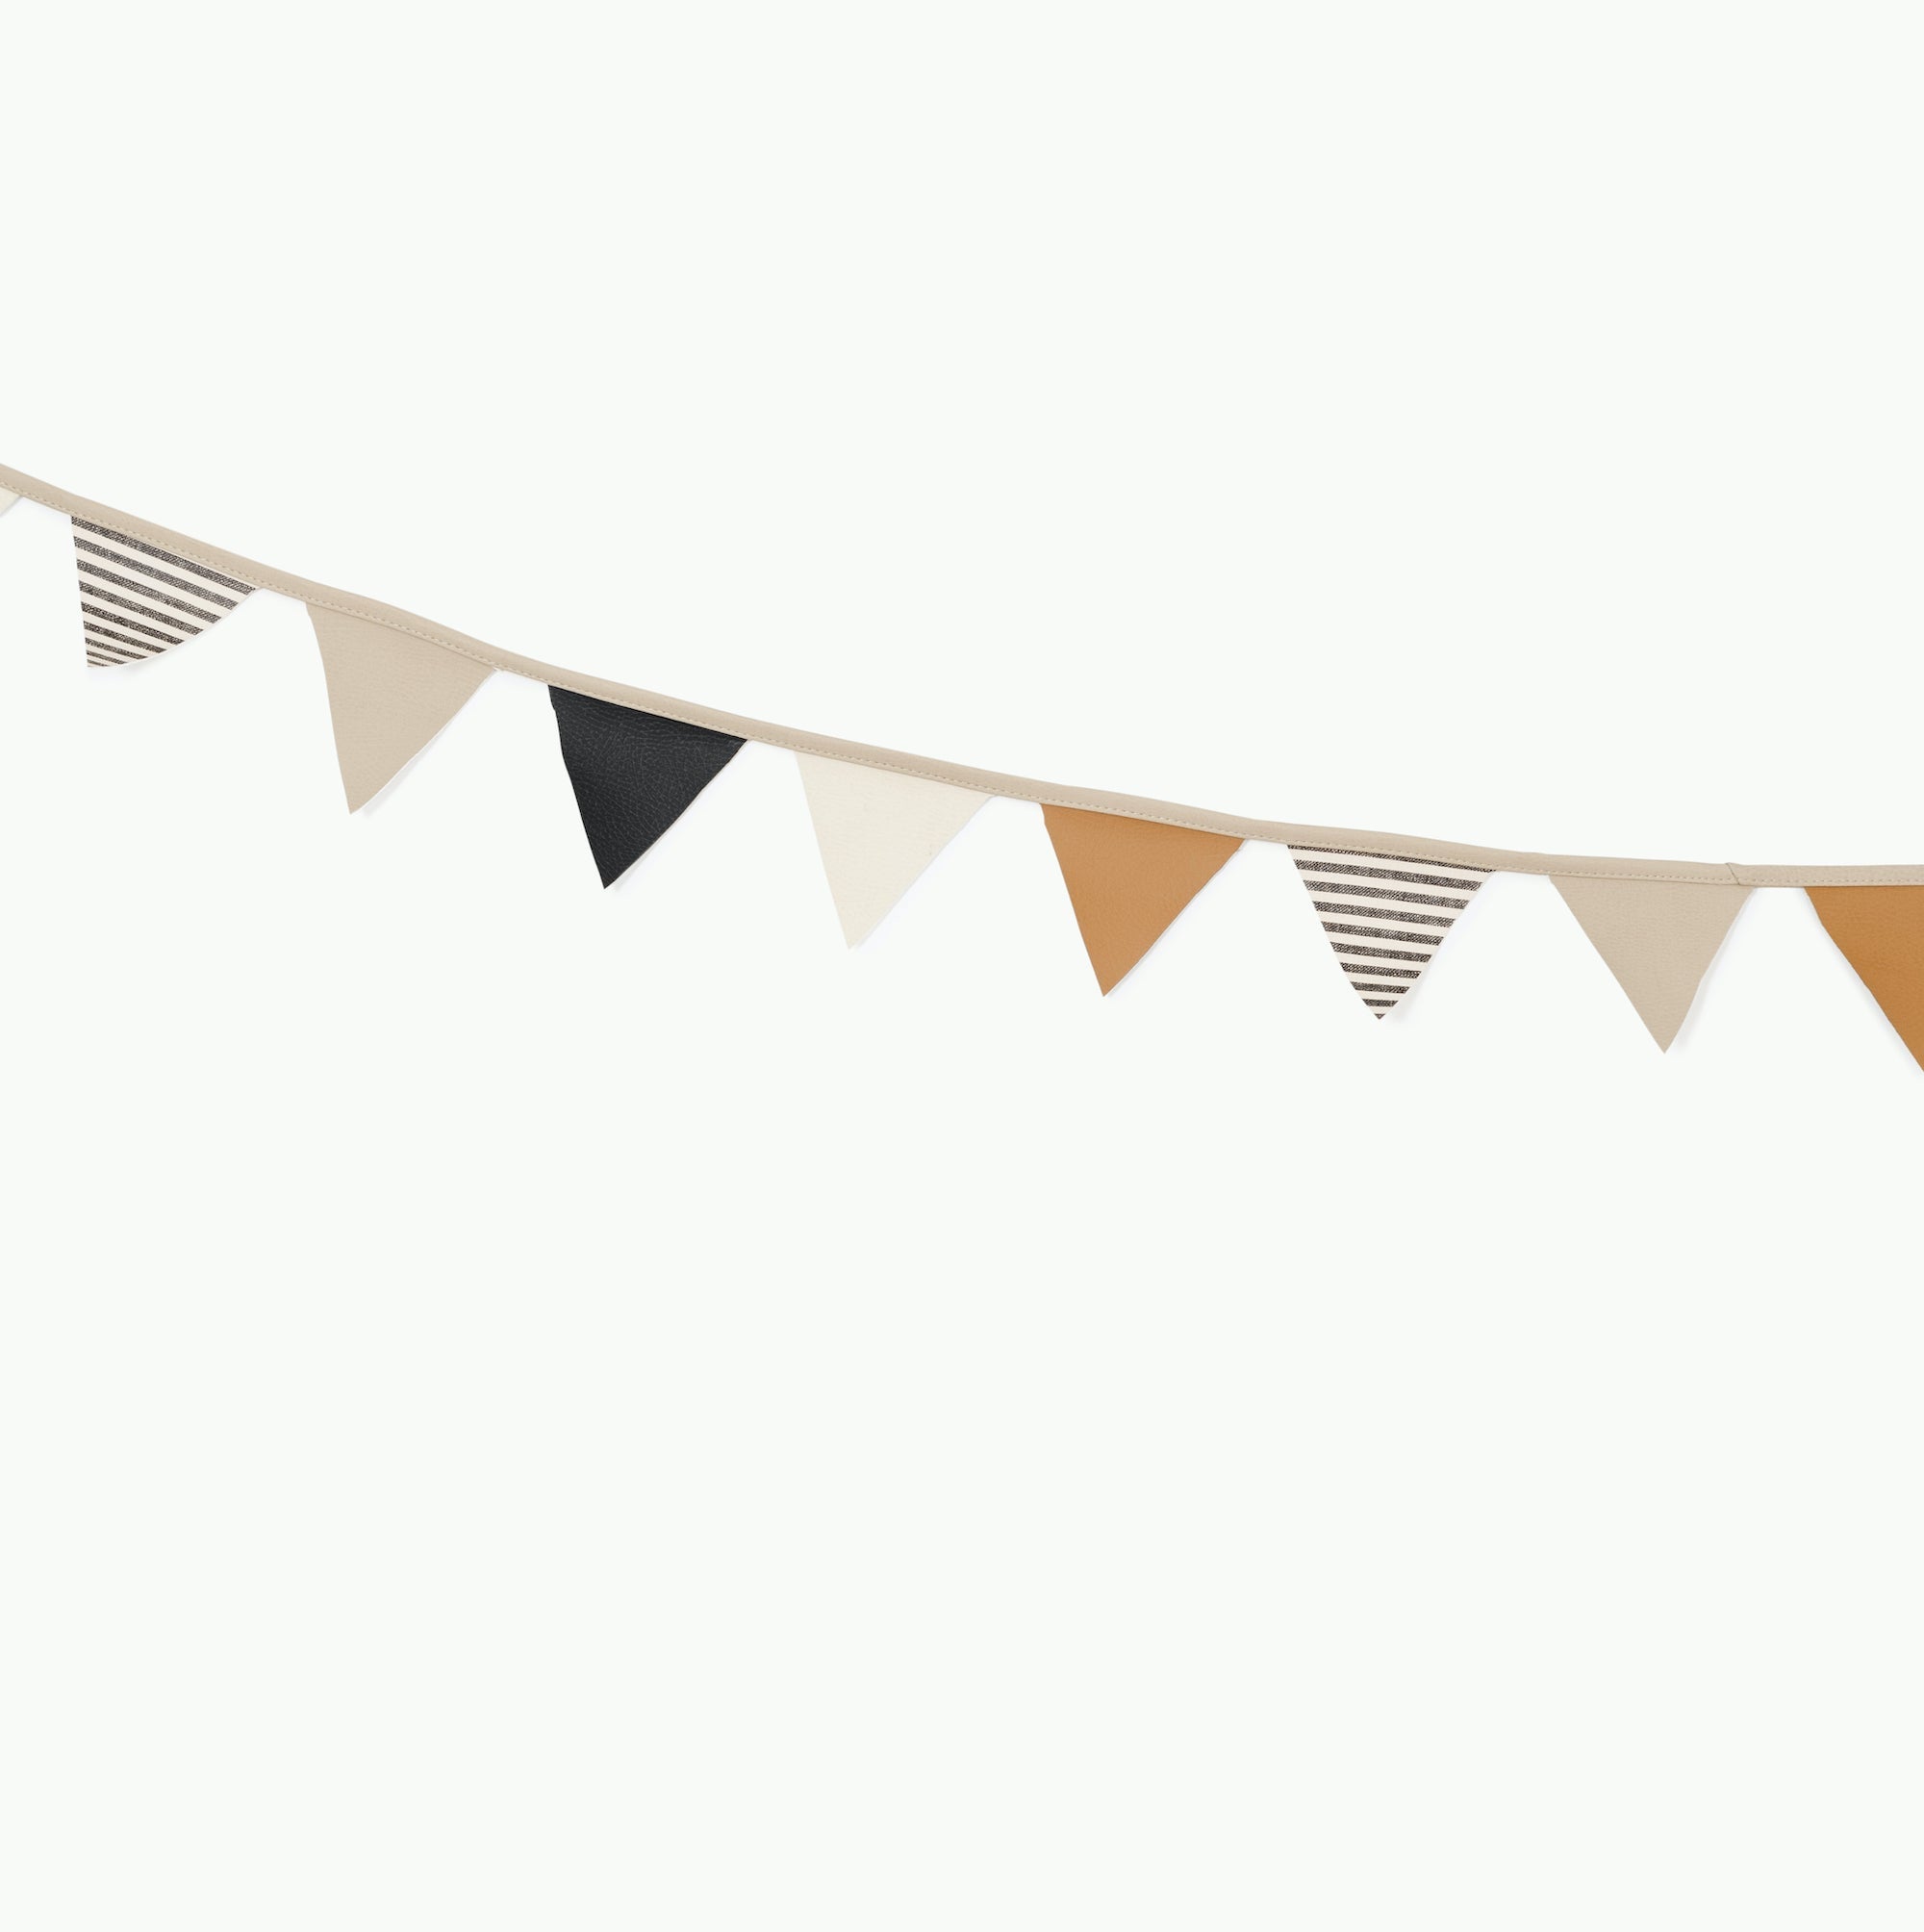 Stone Stripe@the stone stripe bunting hung up 